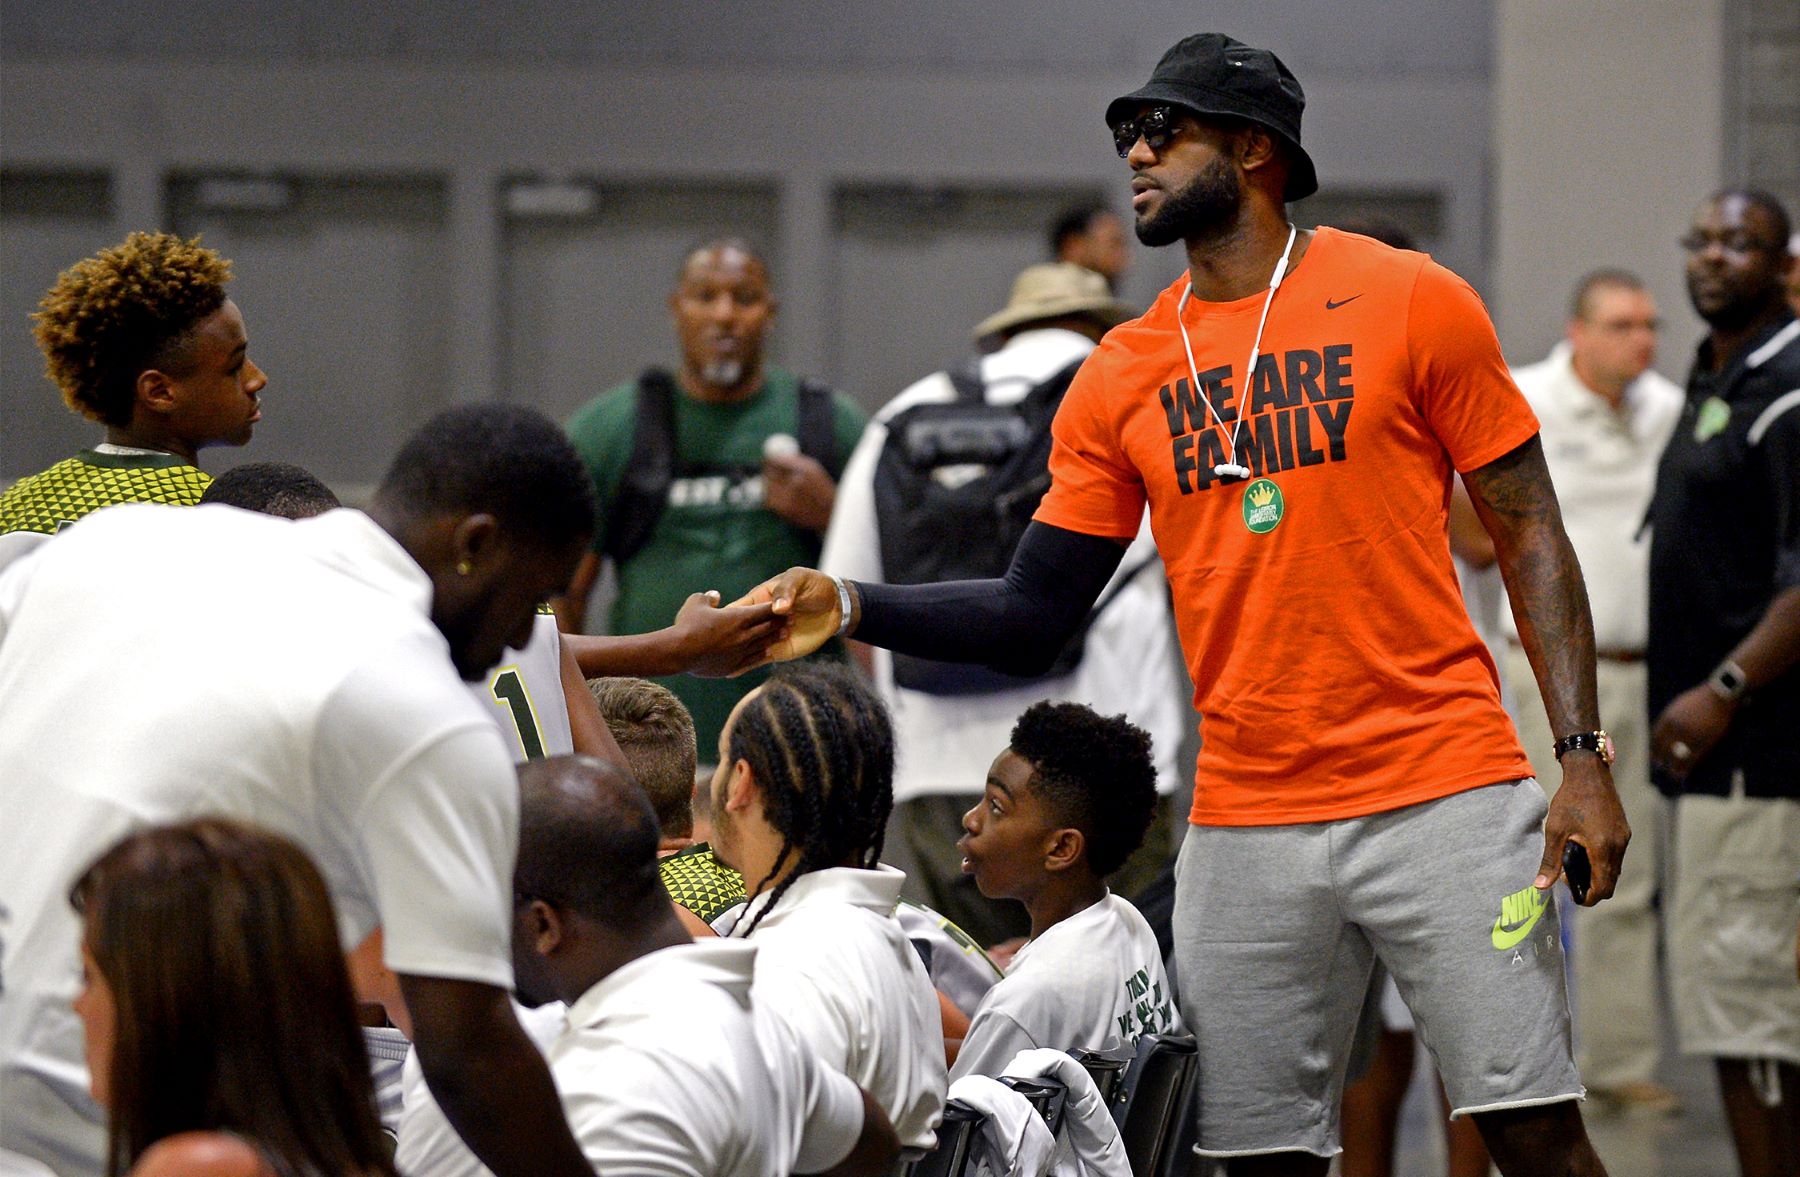 LeBron James being a father to his son LeBron James Jr. at a youth tournament game, absent Anthony McClelland